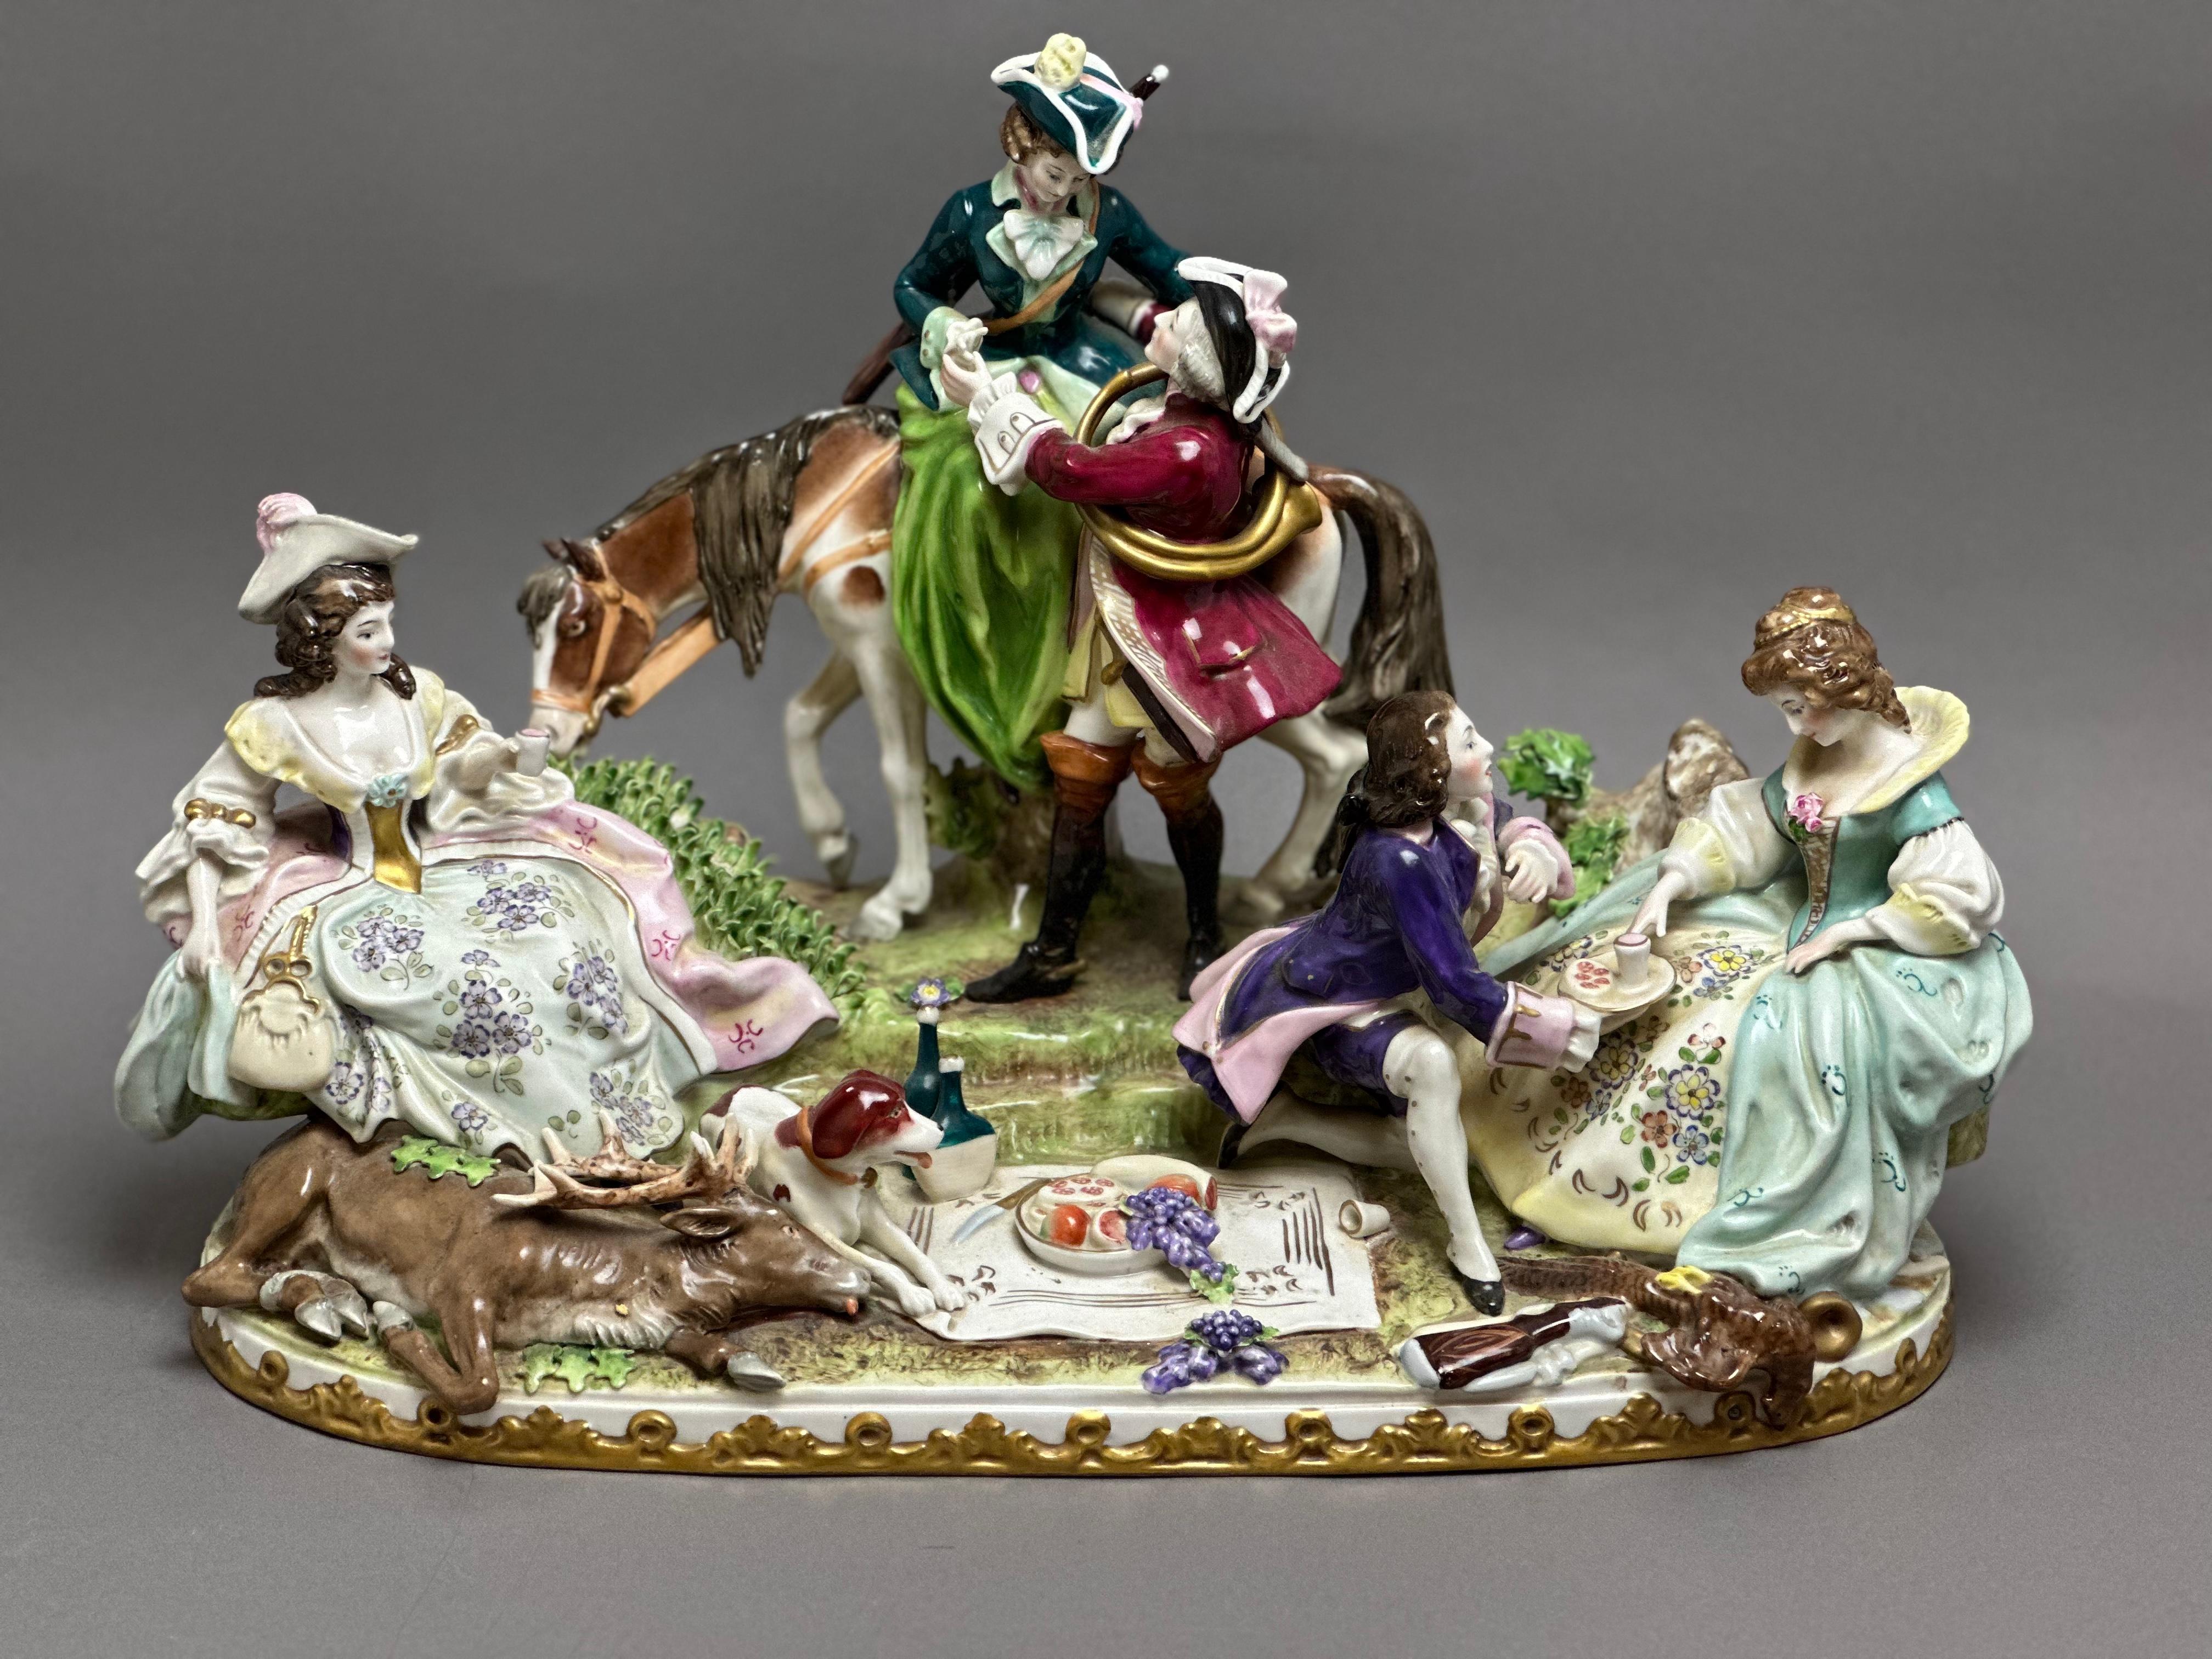 House of Scheibe Alsbach founded in 1835. The porcelain figures are manufactured in Germany, before 1989. The figures are a two love couple and a women at the 'hunting scene in circa 1750. The figure is handmade from porcelain and painted in many